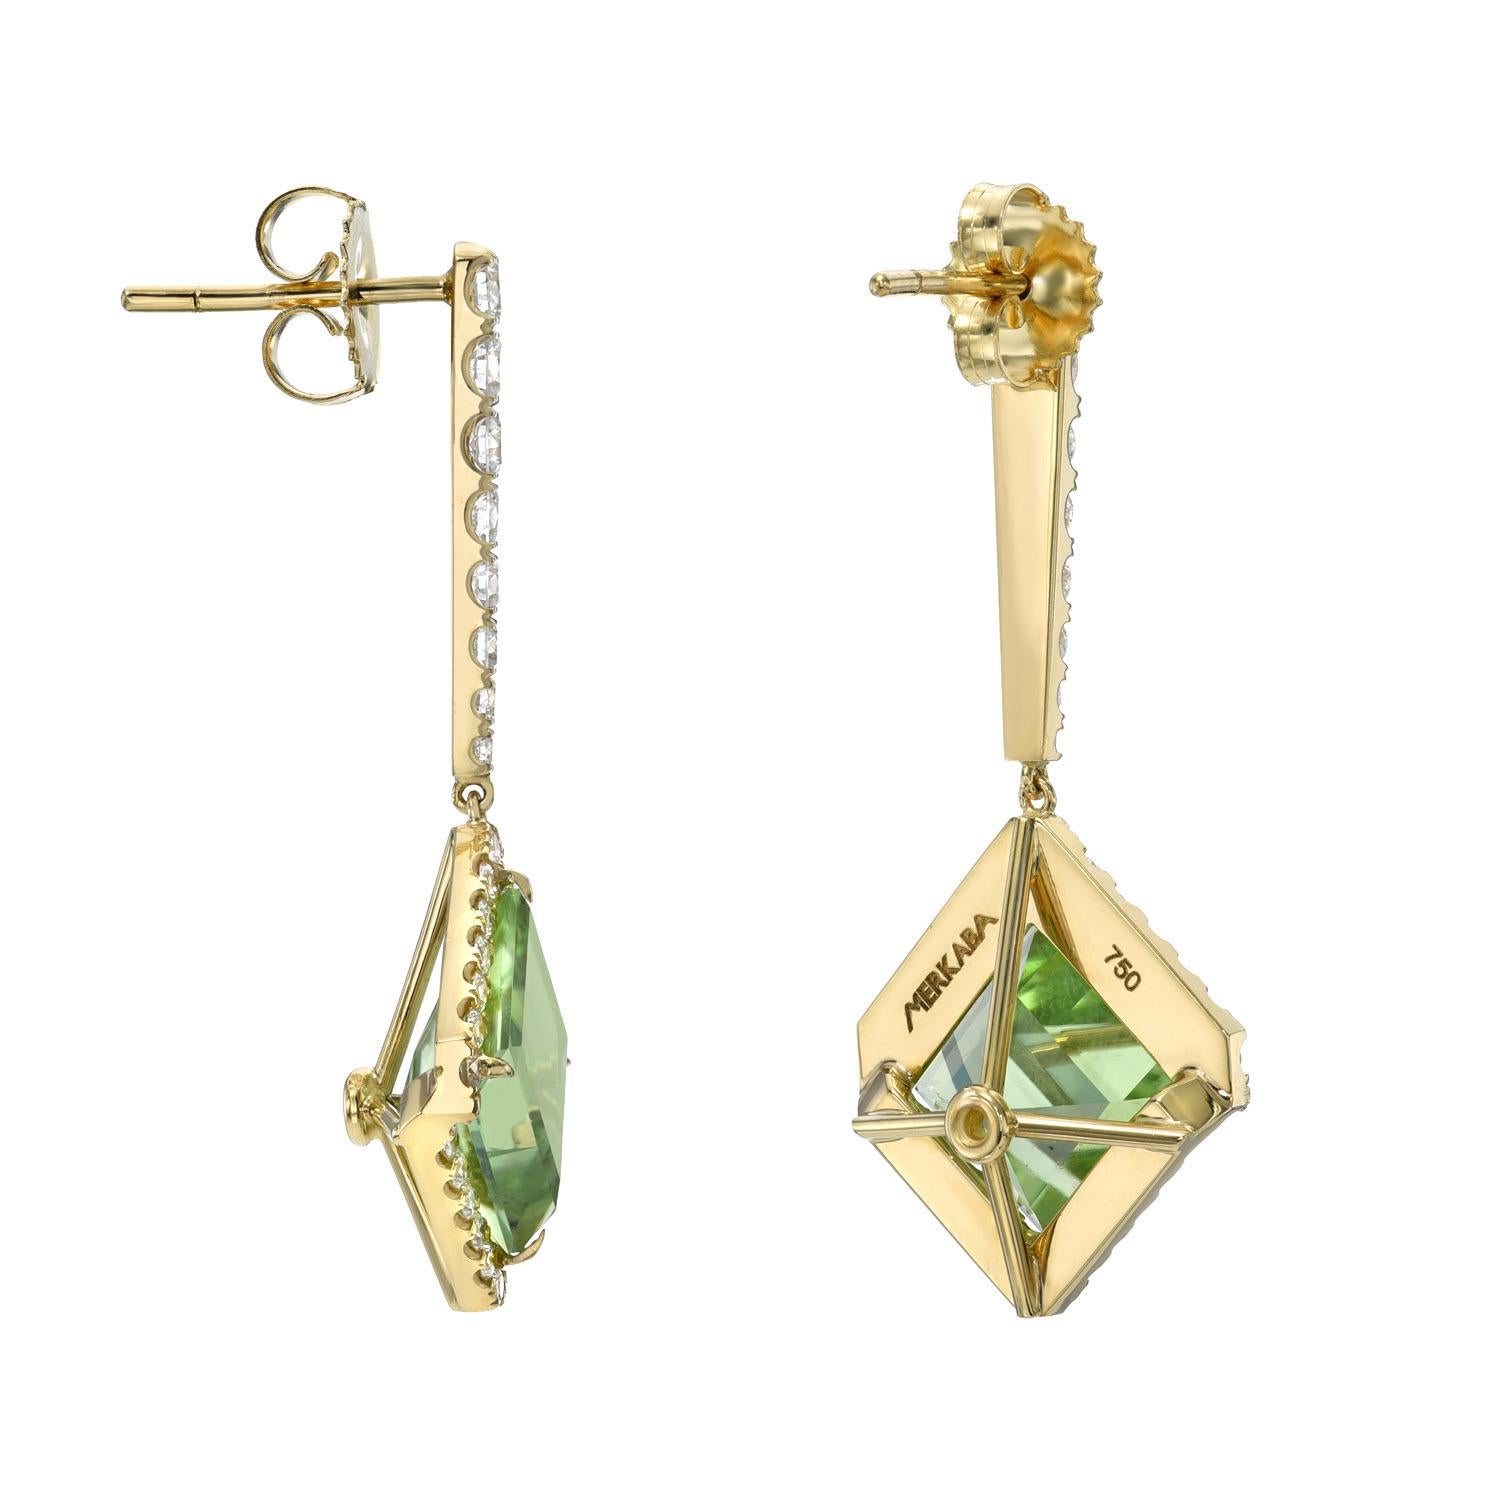 Unique 9.37 carat Mint Peridot kite shaped earrings, decorated with a total of 1.61 carat collection diamonds. 18K yellow gold.
Crafted by extremely skilled hands in the USA.
Returns are accepted and paid by us within 7 days of delivery.